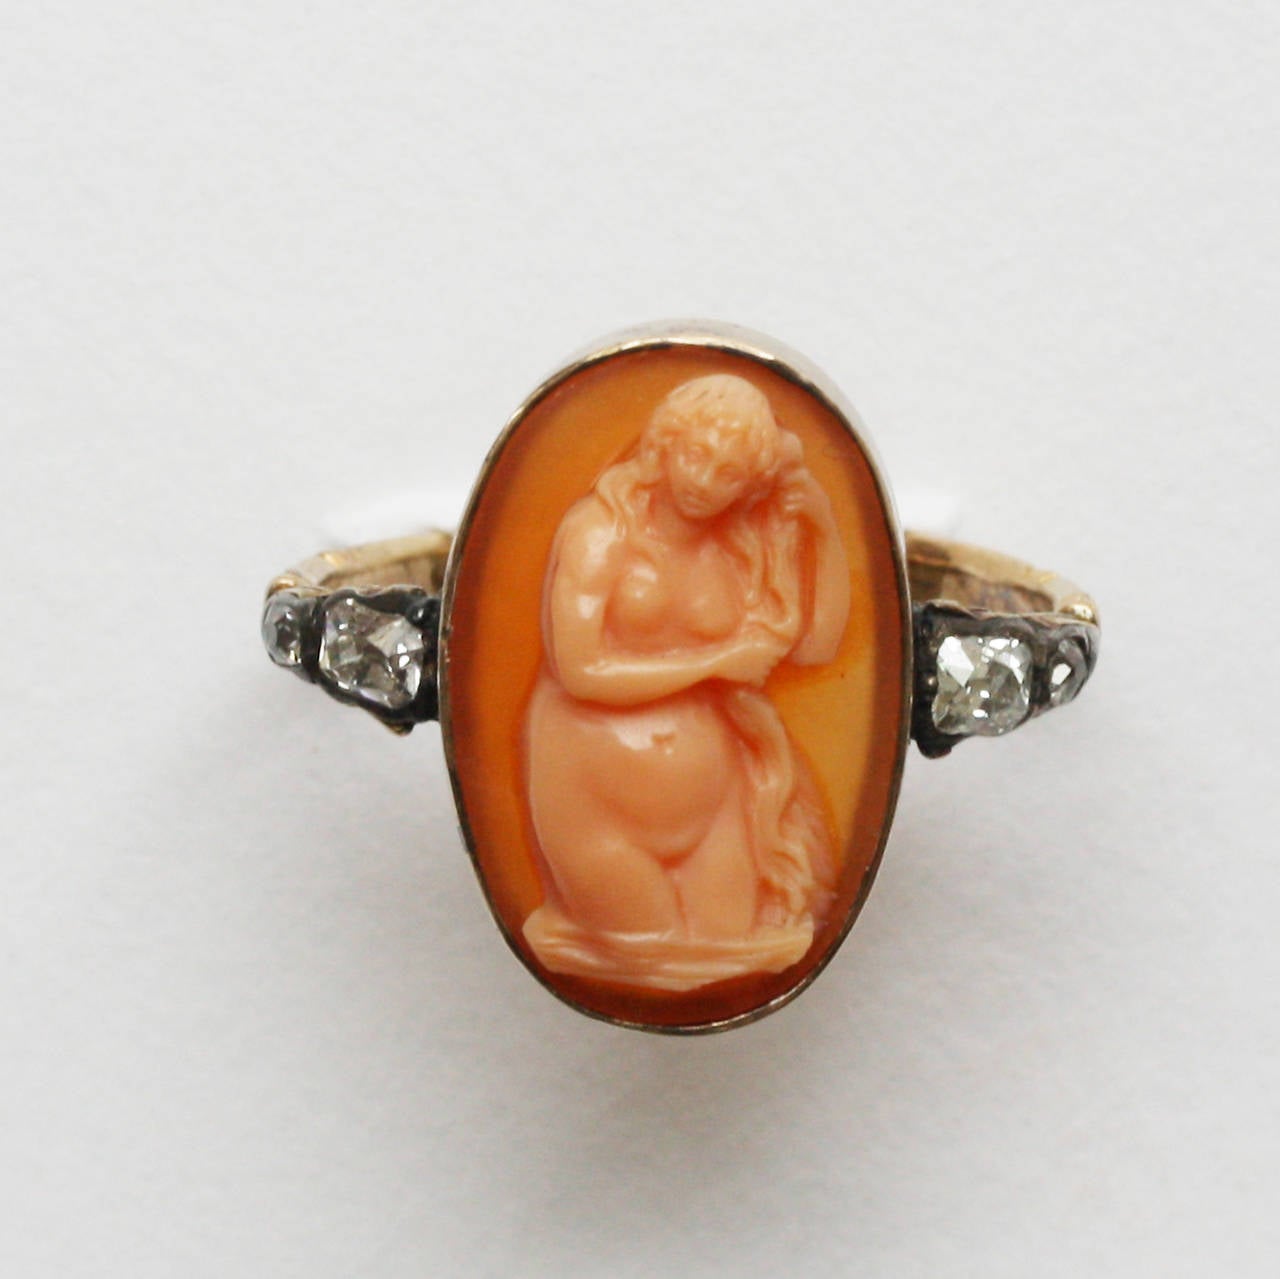 A gold ring set with an agate cameo representing the birth of Venus or Venus Anadyomene, depicting Venus the goddess of love rising from the sea wringing her hair (after the painting by Titian, Venus Rising from the Sea, from the National Gallery of